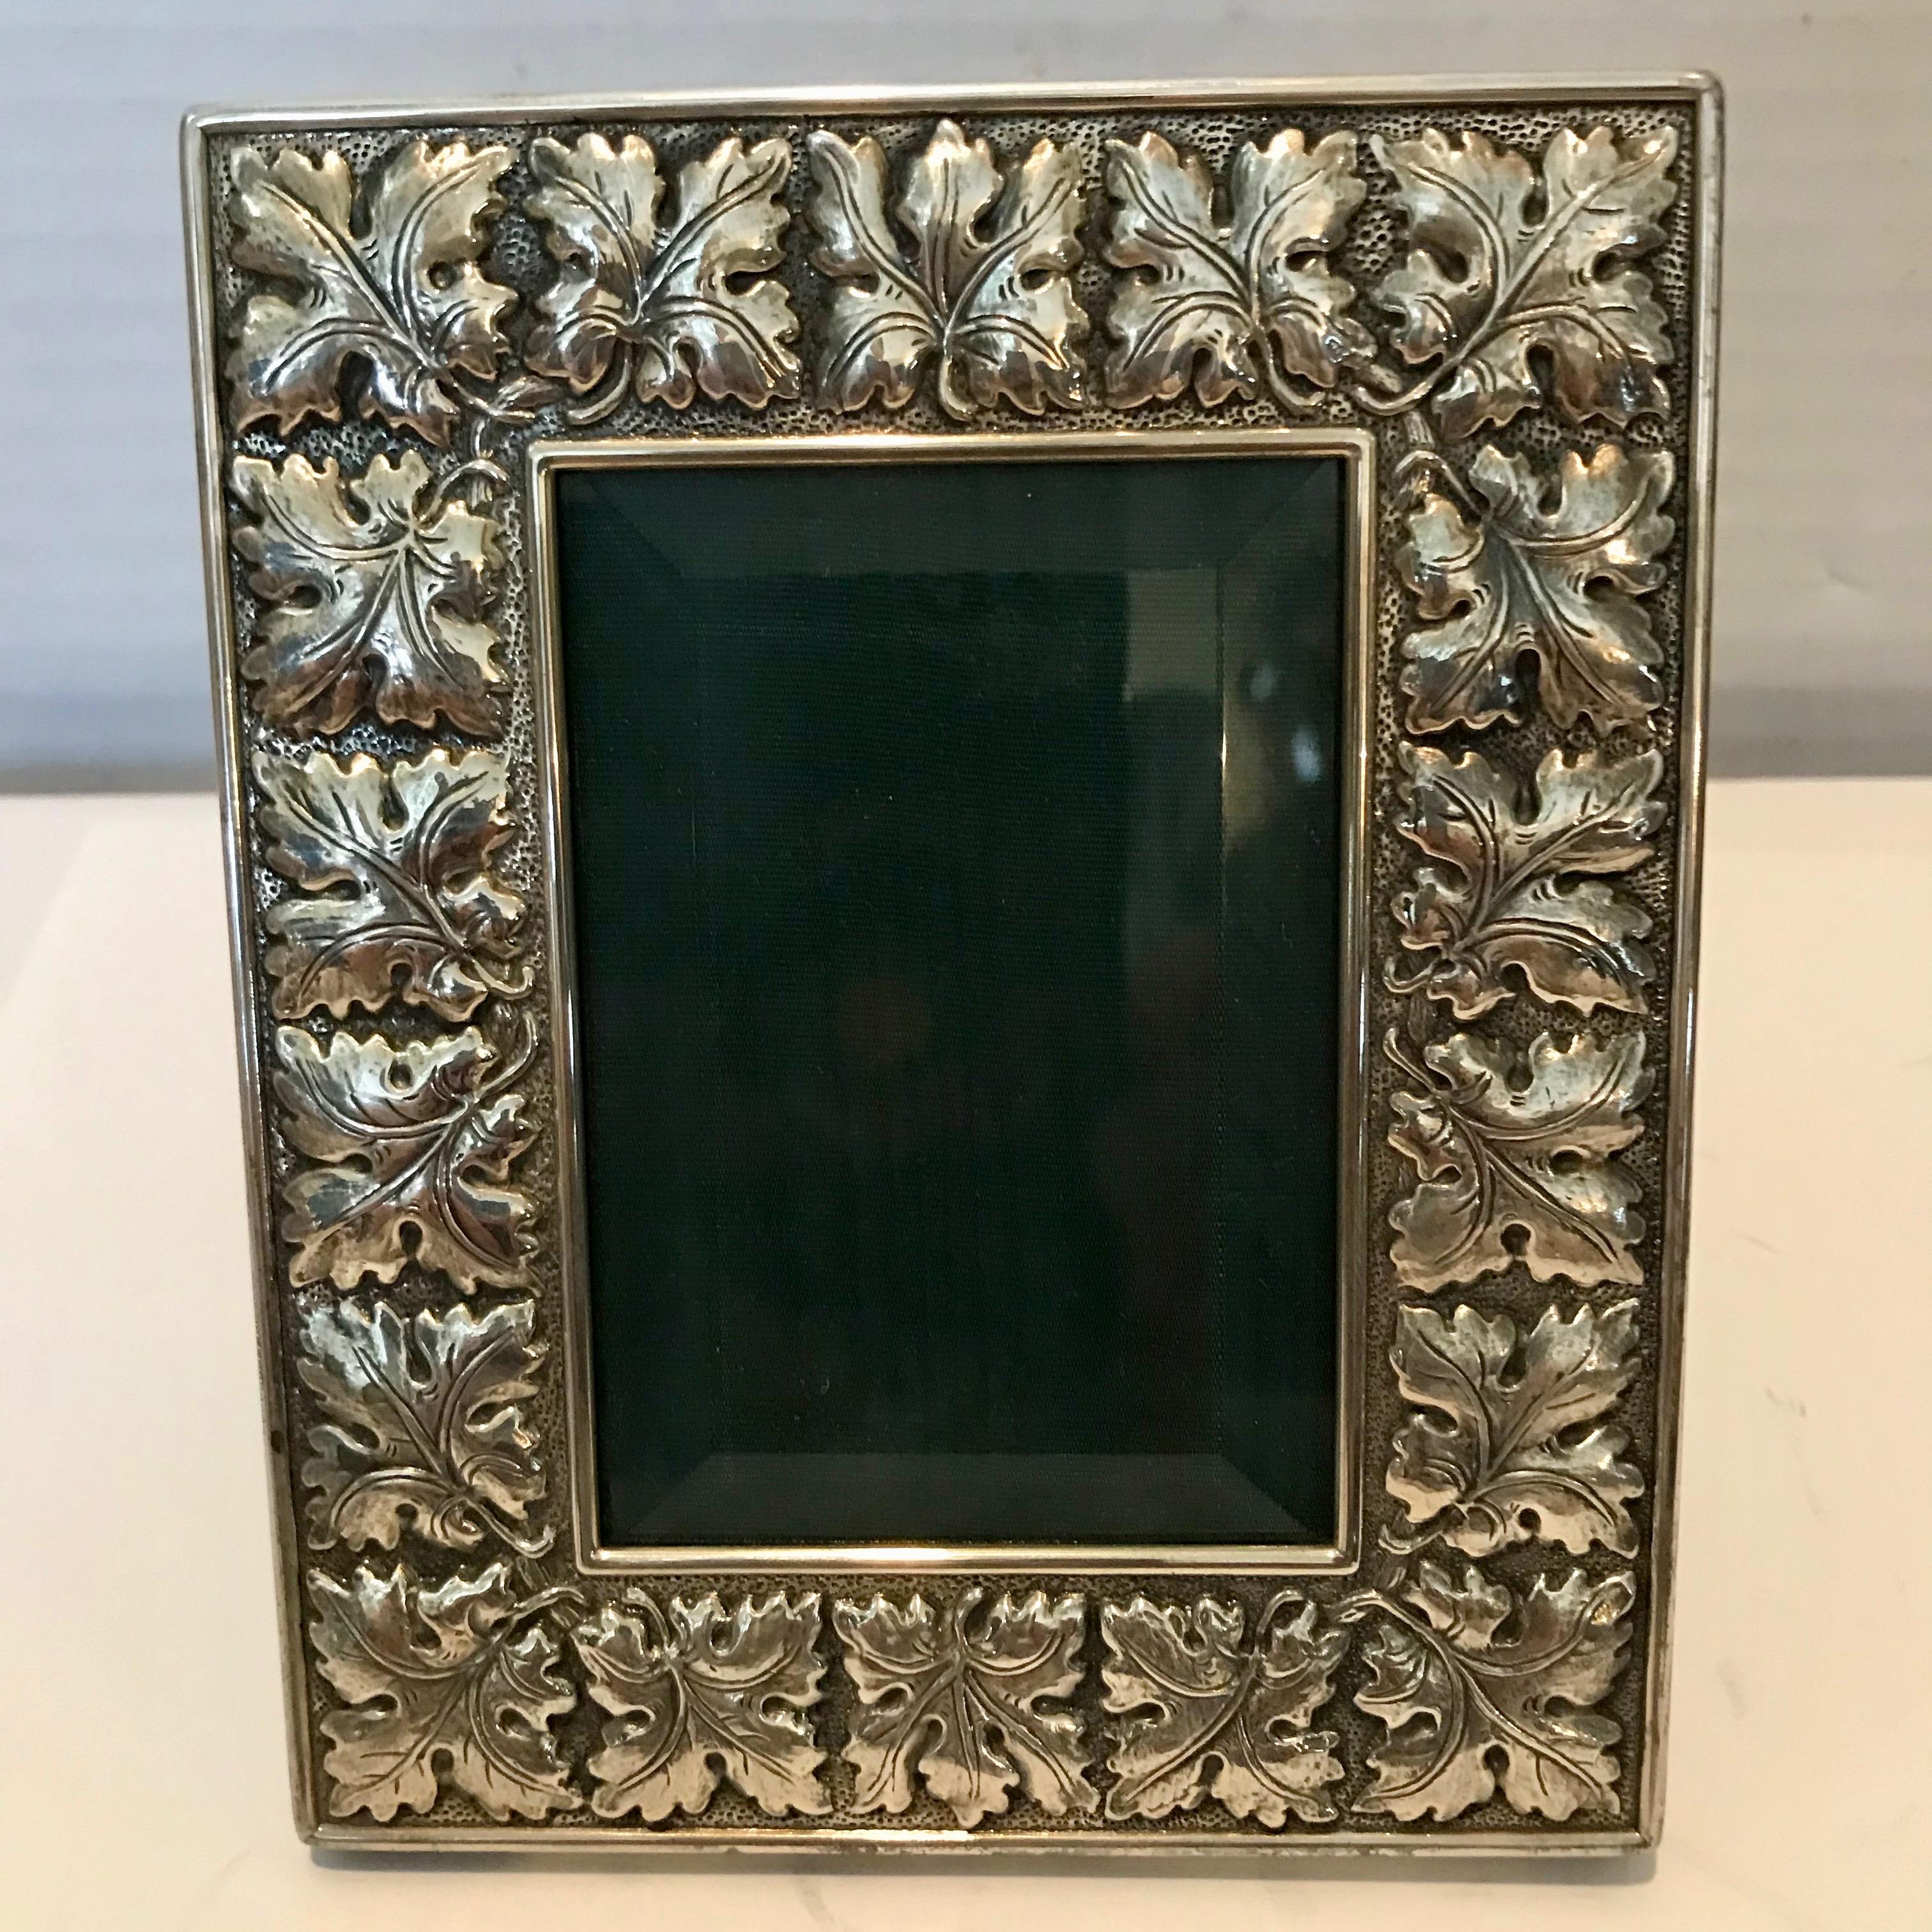 Leaf pattern by the iconic silversmith. Superior quality and workmanship.
The frame comes with original box ( worn ). The hand finished frame is unused
and in excellent condition with classic leather backing and beveled glass.